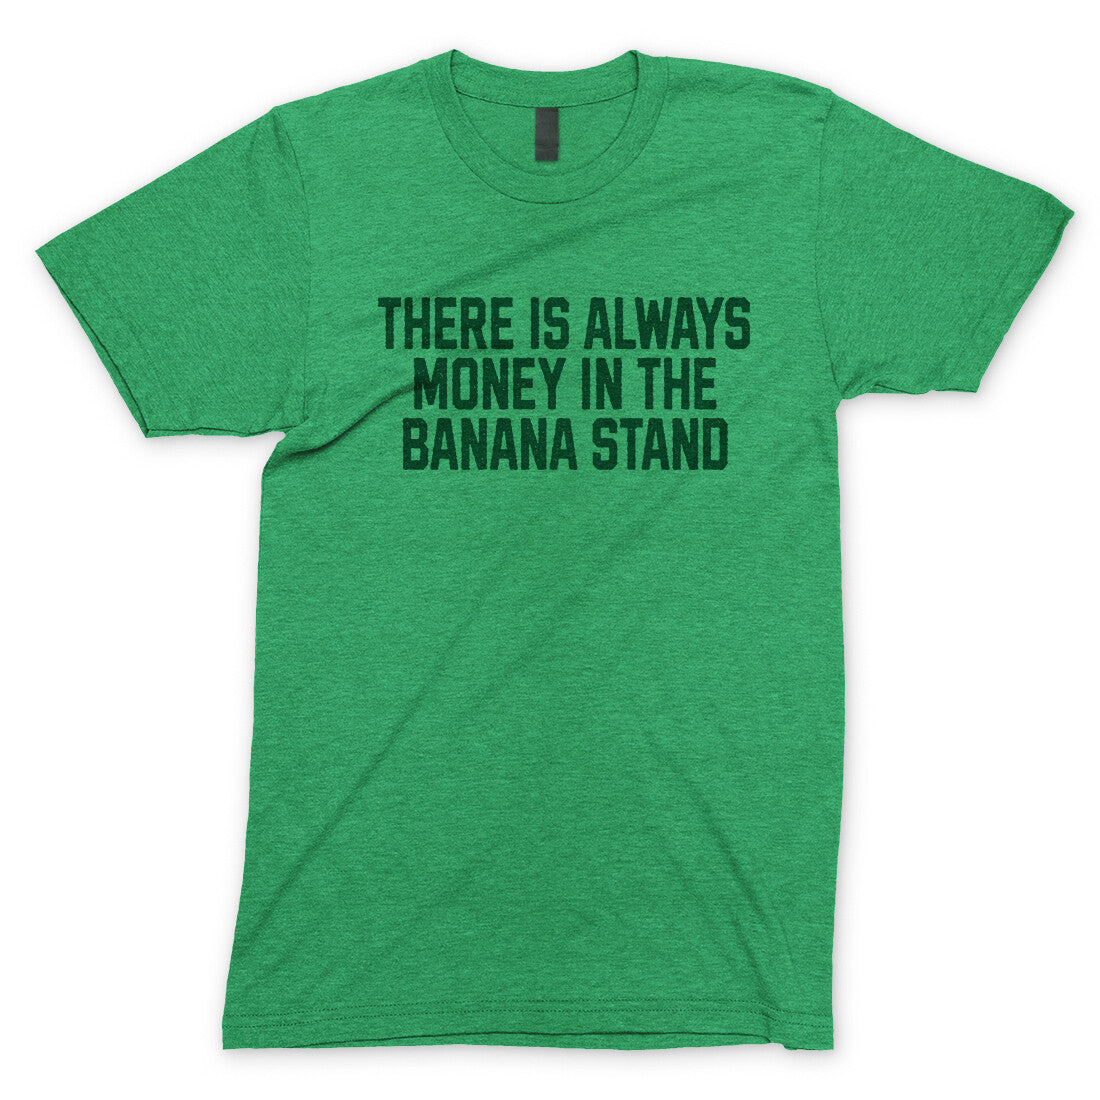 There is Always Money in the Banana Stand in Heather Irish Green Color